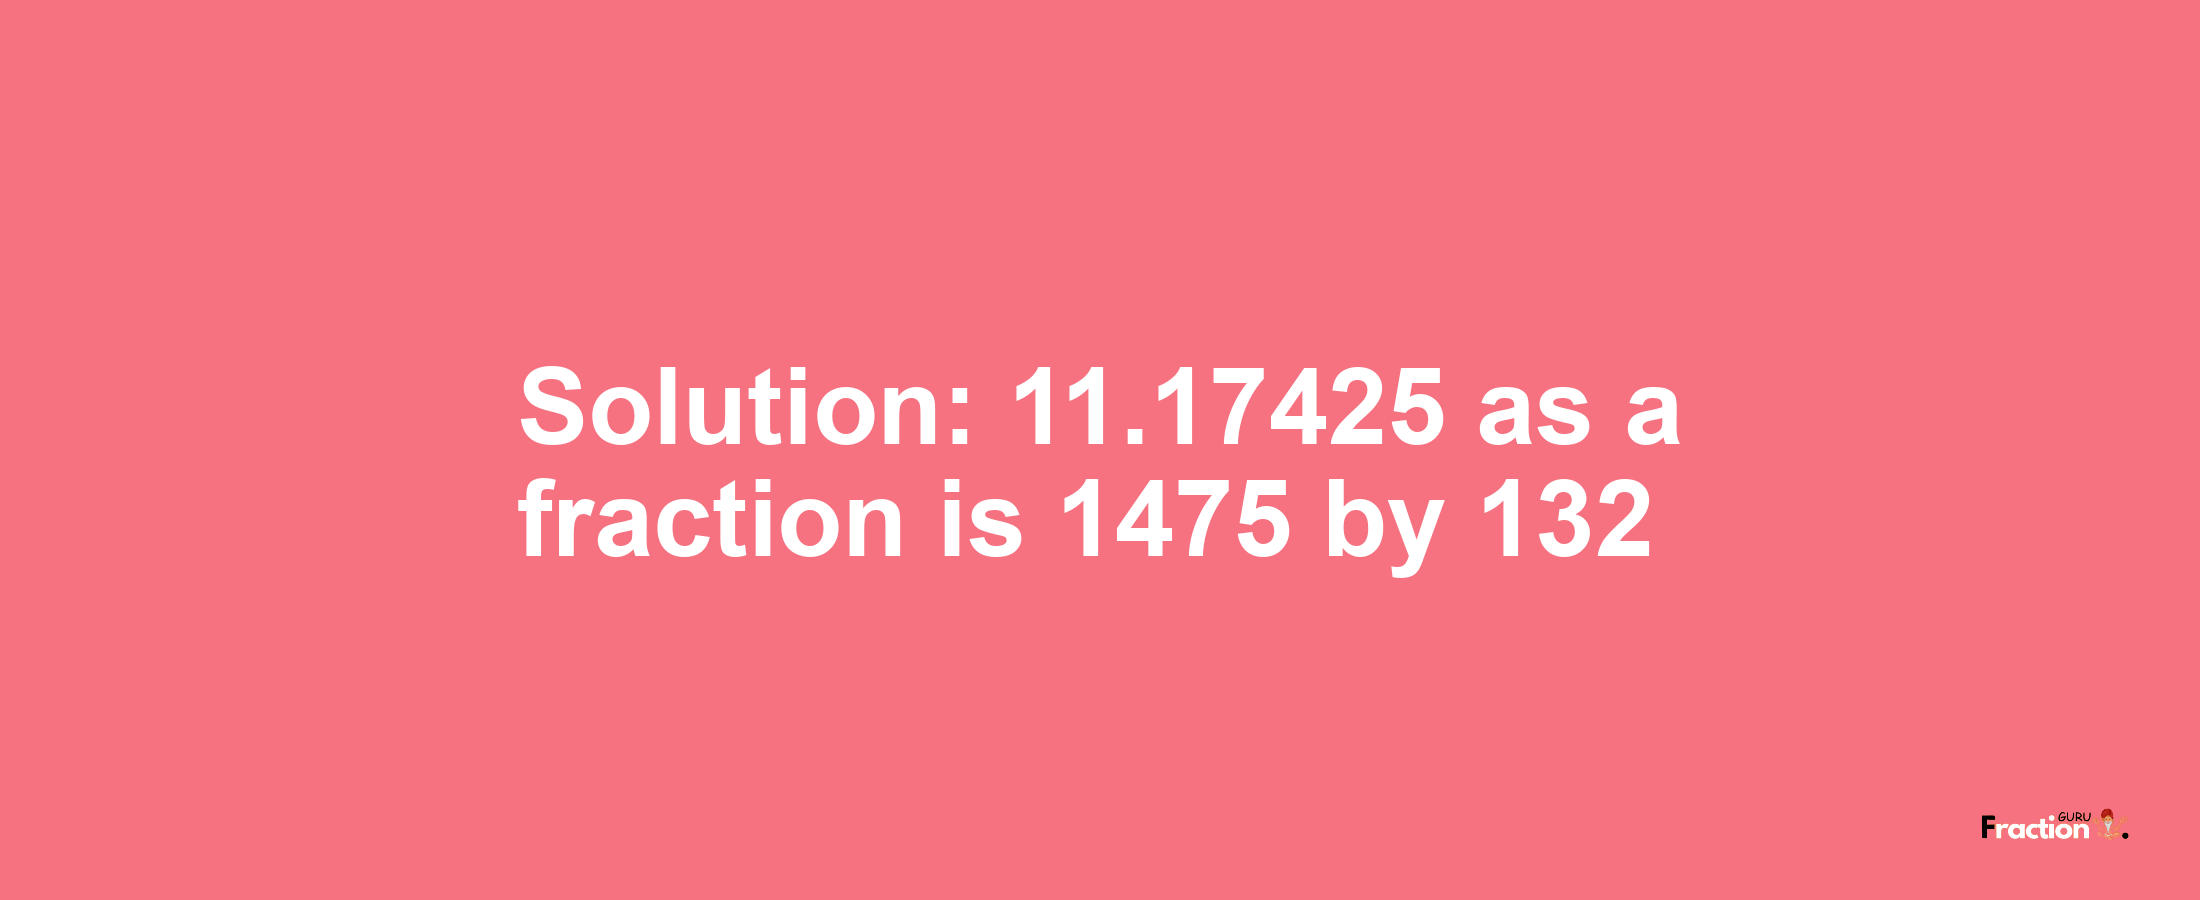 Solution:11.17425 as a fraction is 1475/132